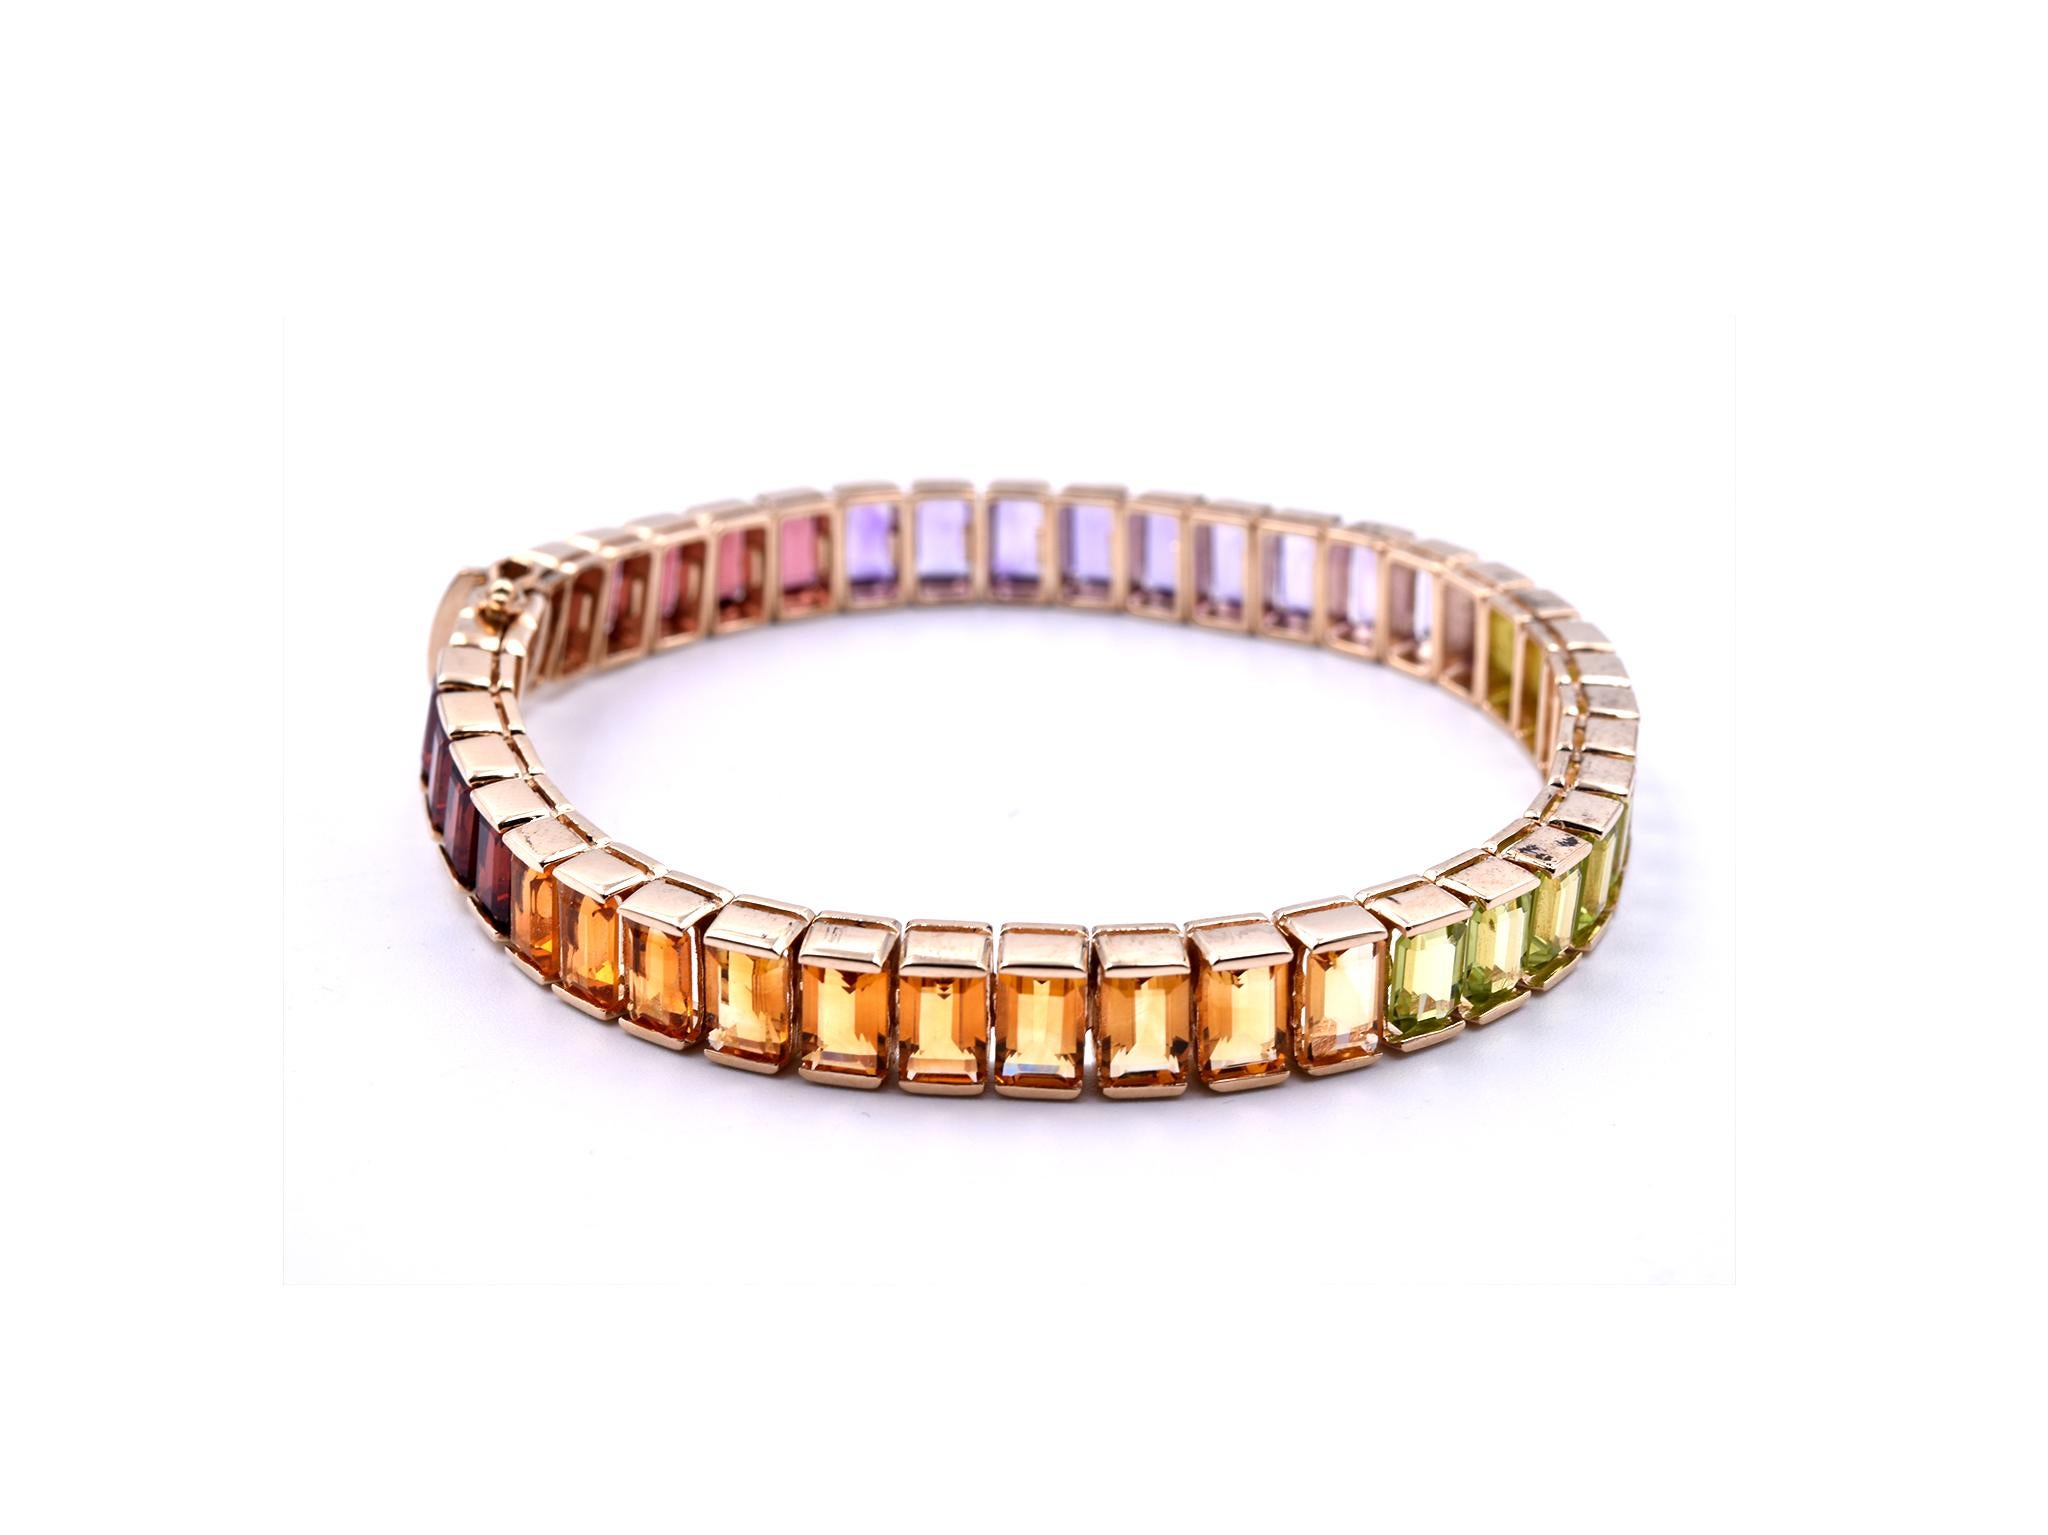 Designer: custom design
Material: 14k yellow gold
Gemstones: 42= 16.40cttw
Dimensions: bracelet is 7 ¼-inch long and 6.90mm wide 
Weight:  20.00 grams
